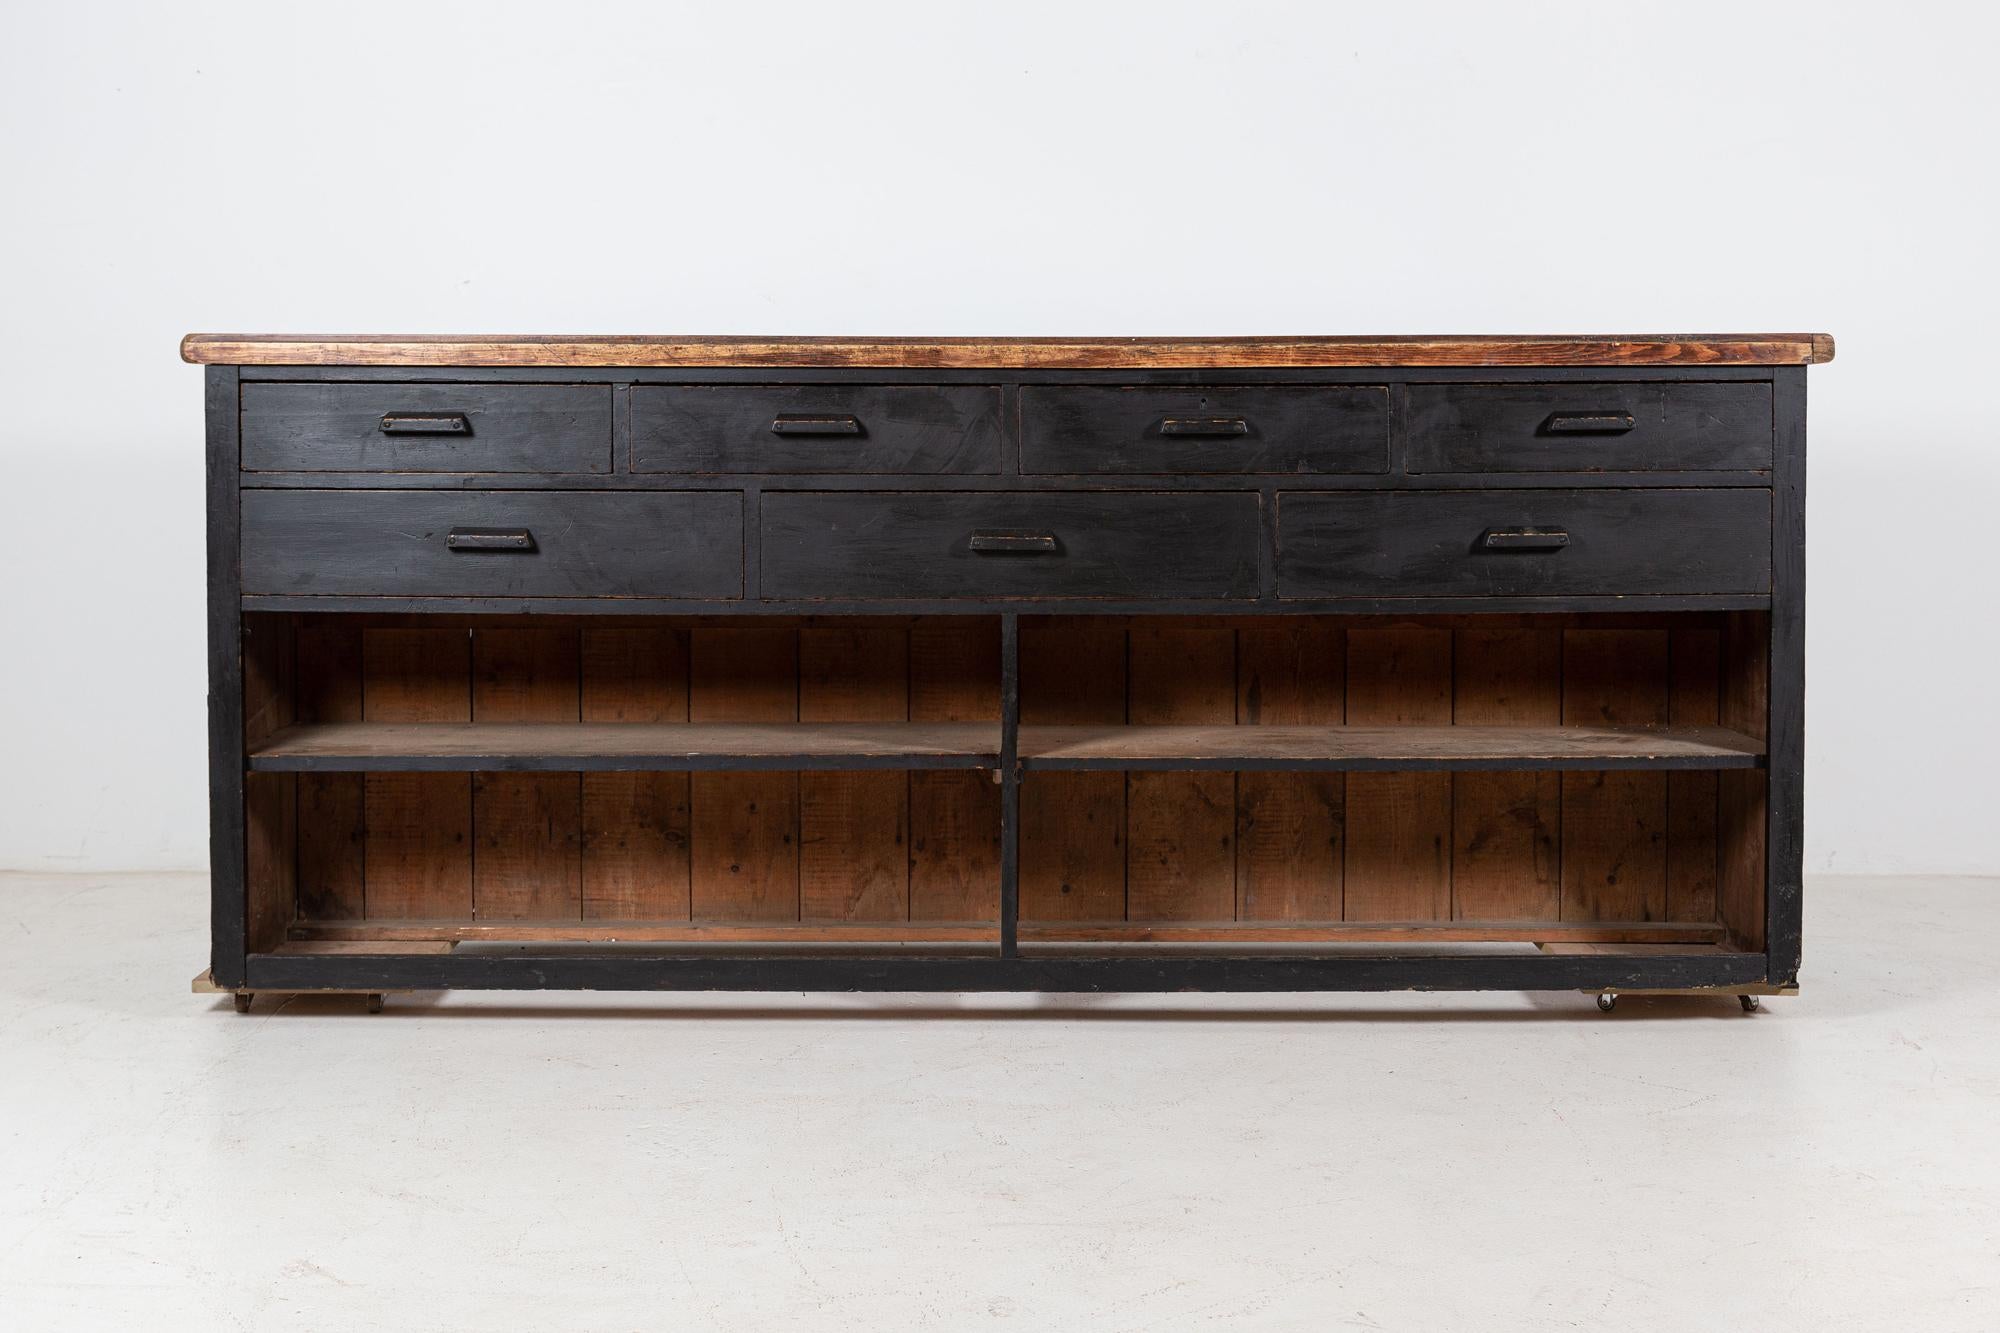 Circa 1890

19thC English ebonized double sided mahogany shop counter

Four glazed doors to the front with internal shelving, original brass latches and recessed handles. Seven drawers to the rear with original wooden handles, original till